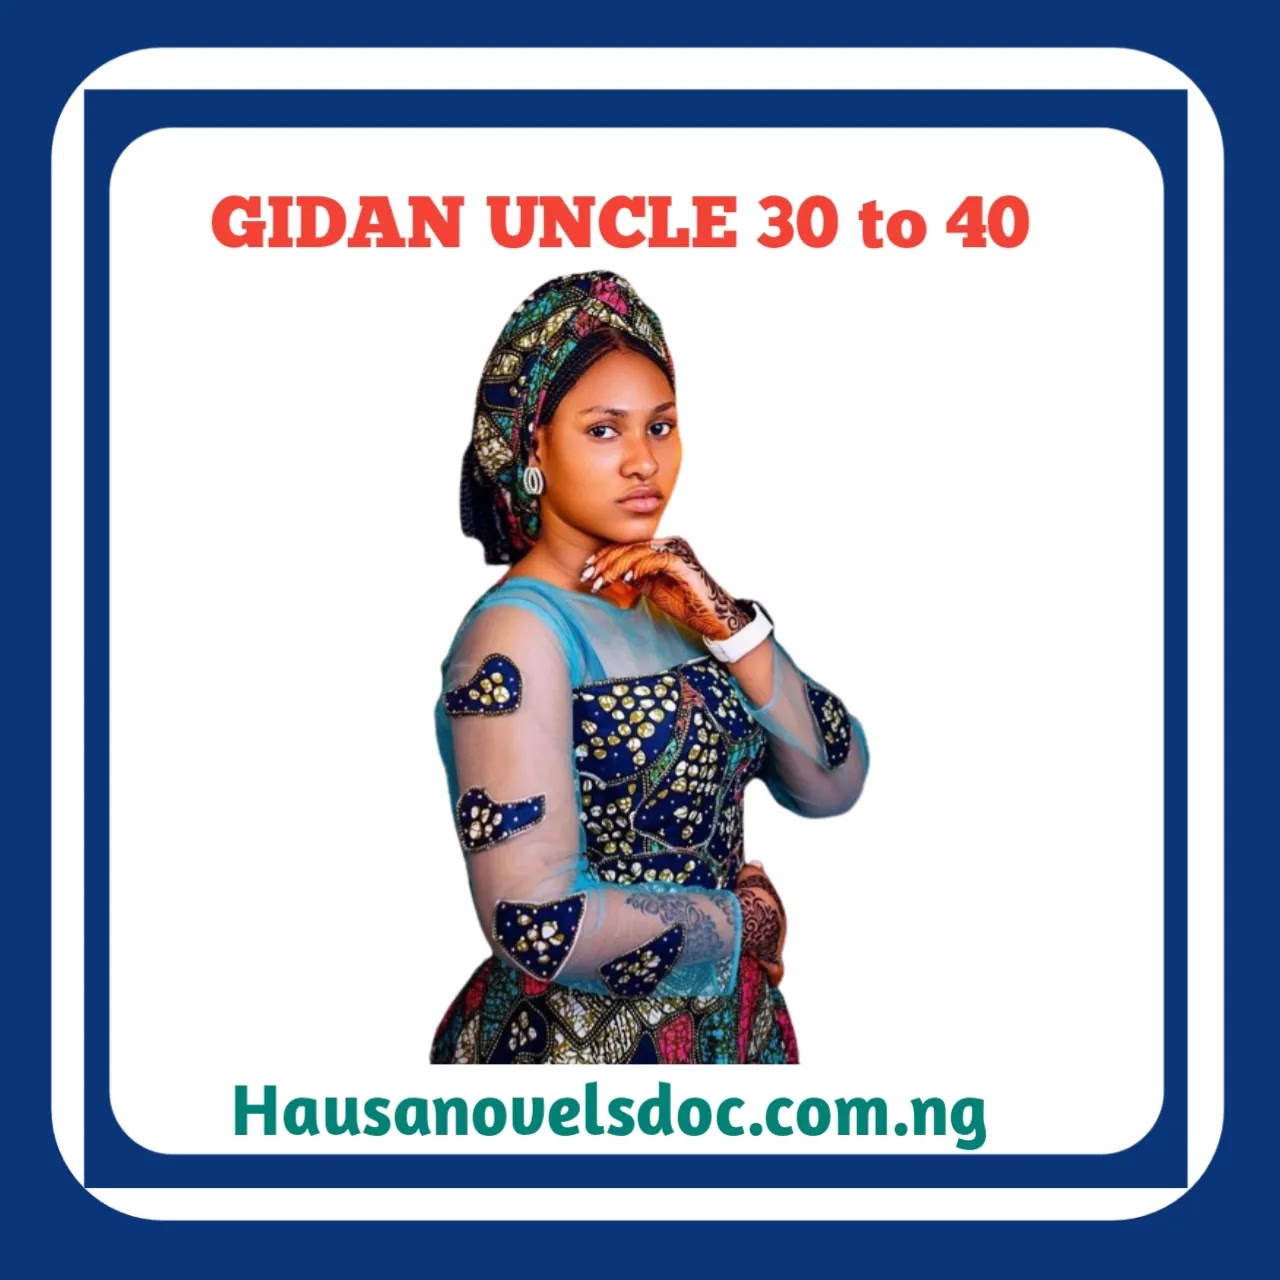 Gidan Uncle page 30 to 40